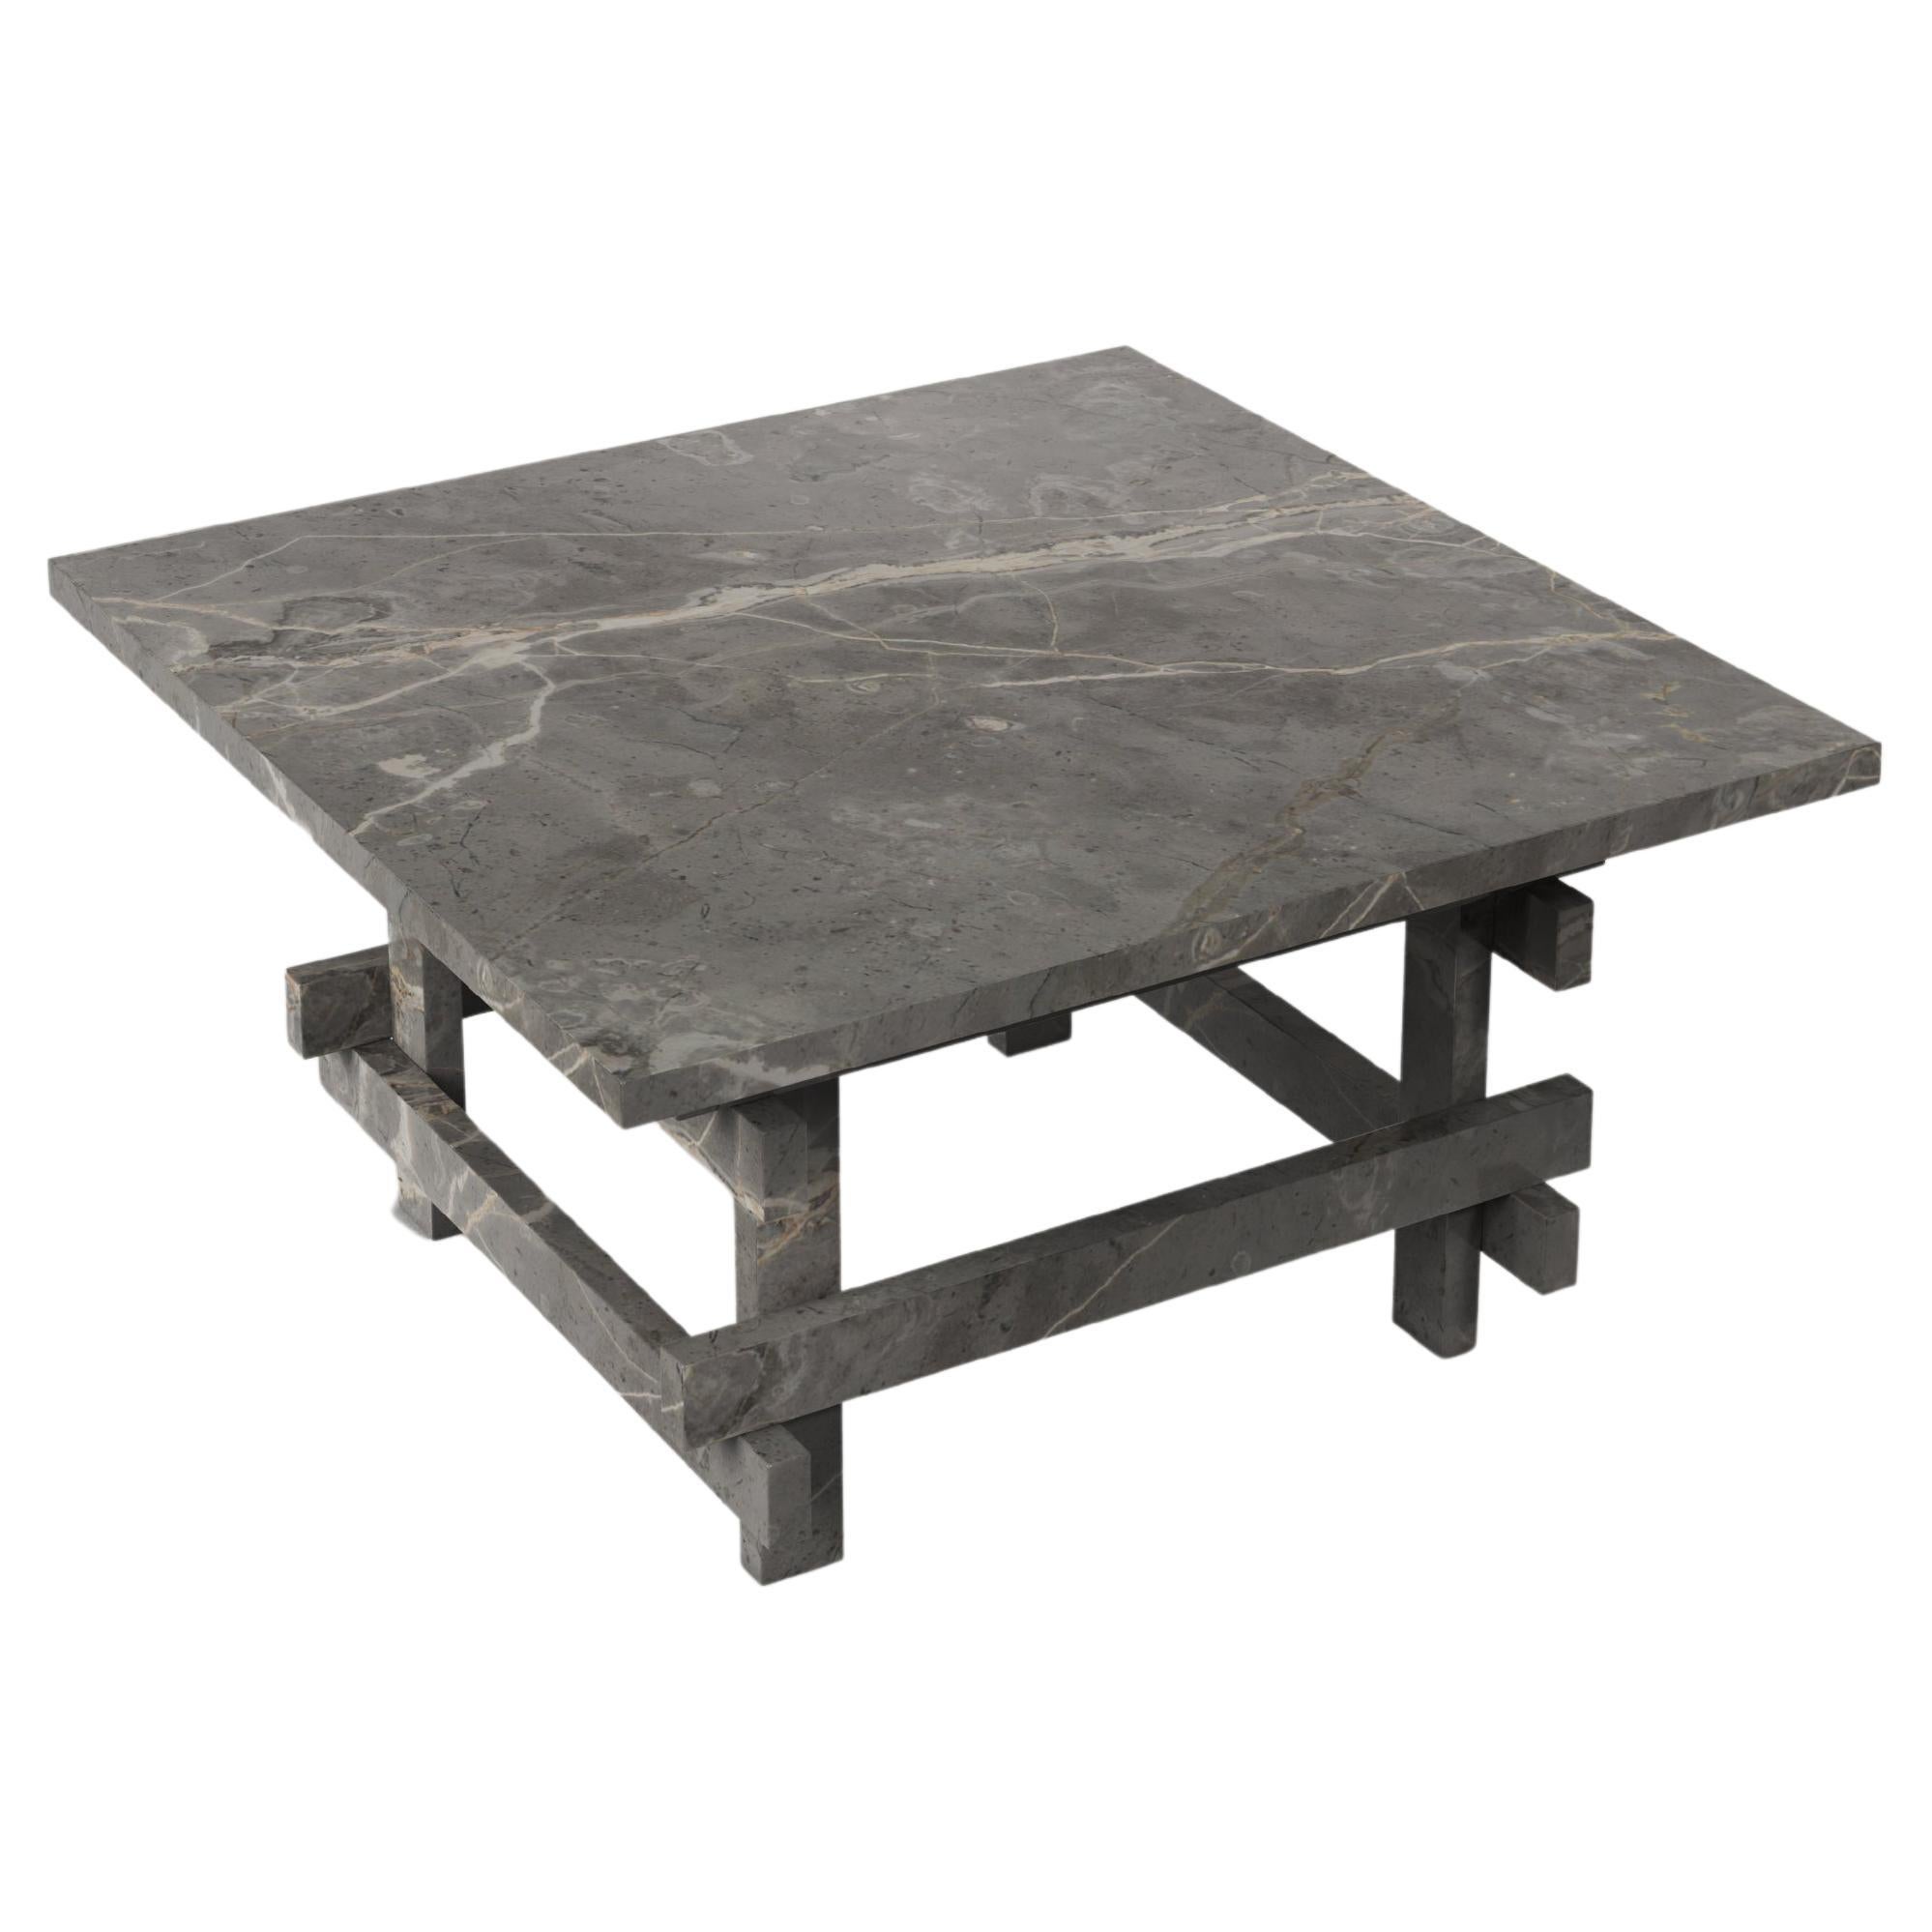 Contemporary Limited Edition Grey Marble Table, Paranoid V2 by Edizione Limitata